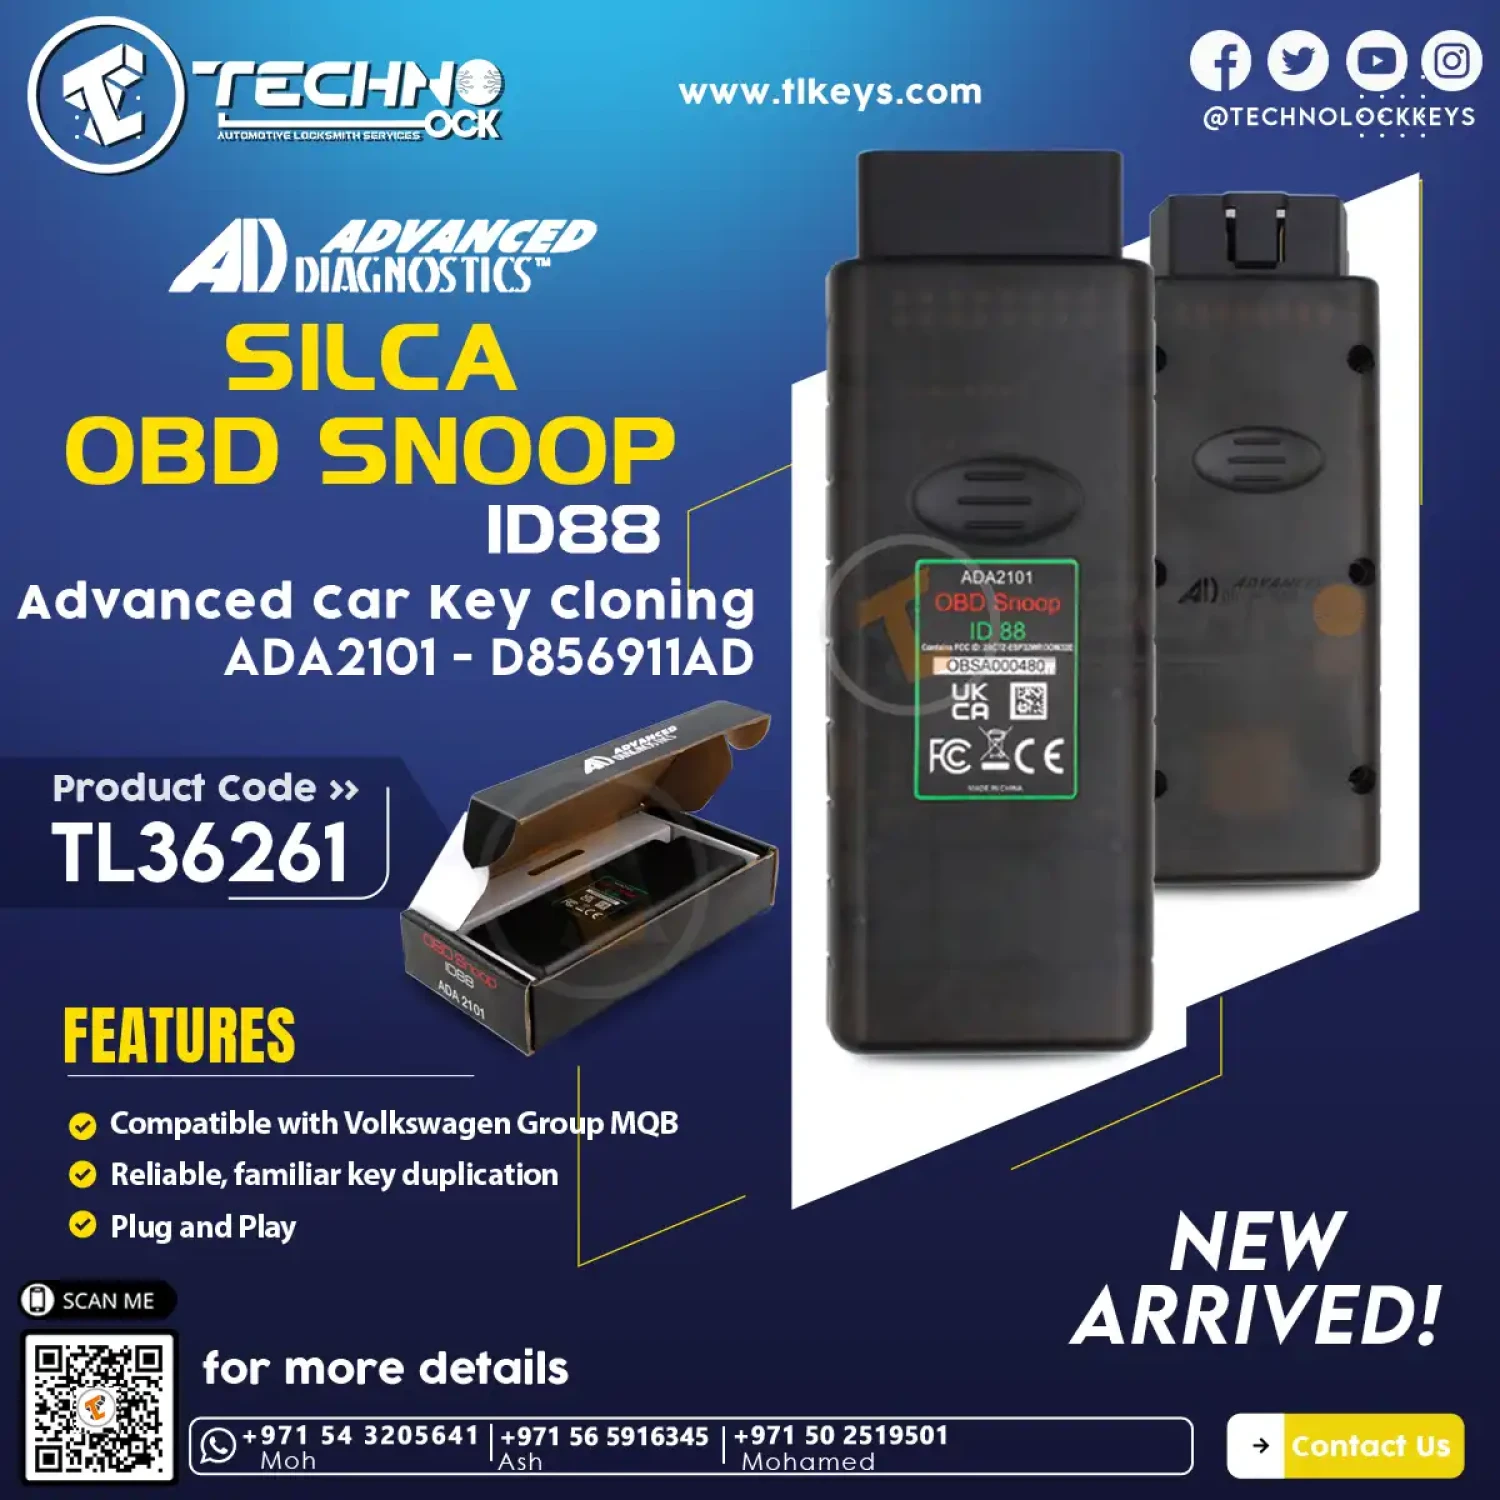 Silca OBD Snoop ID88 - Your Ultimate Cloning Solution for Volkswagen Group MQB Models